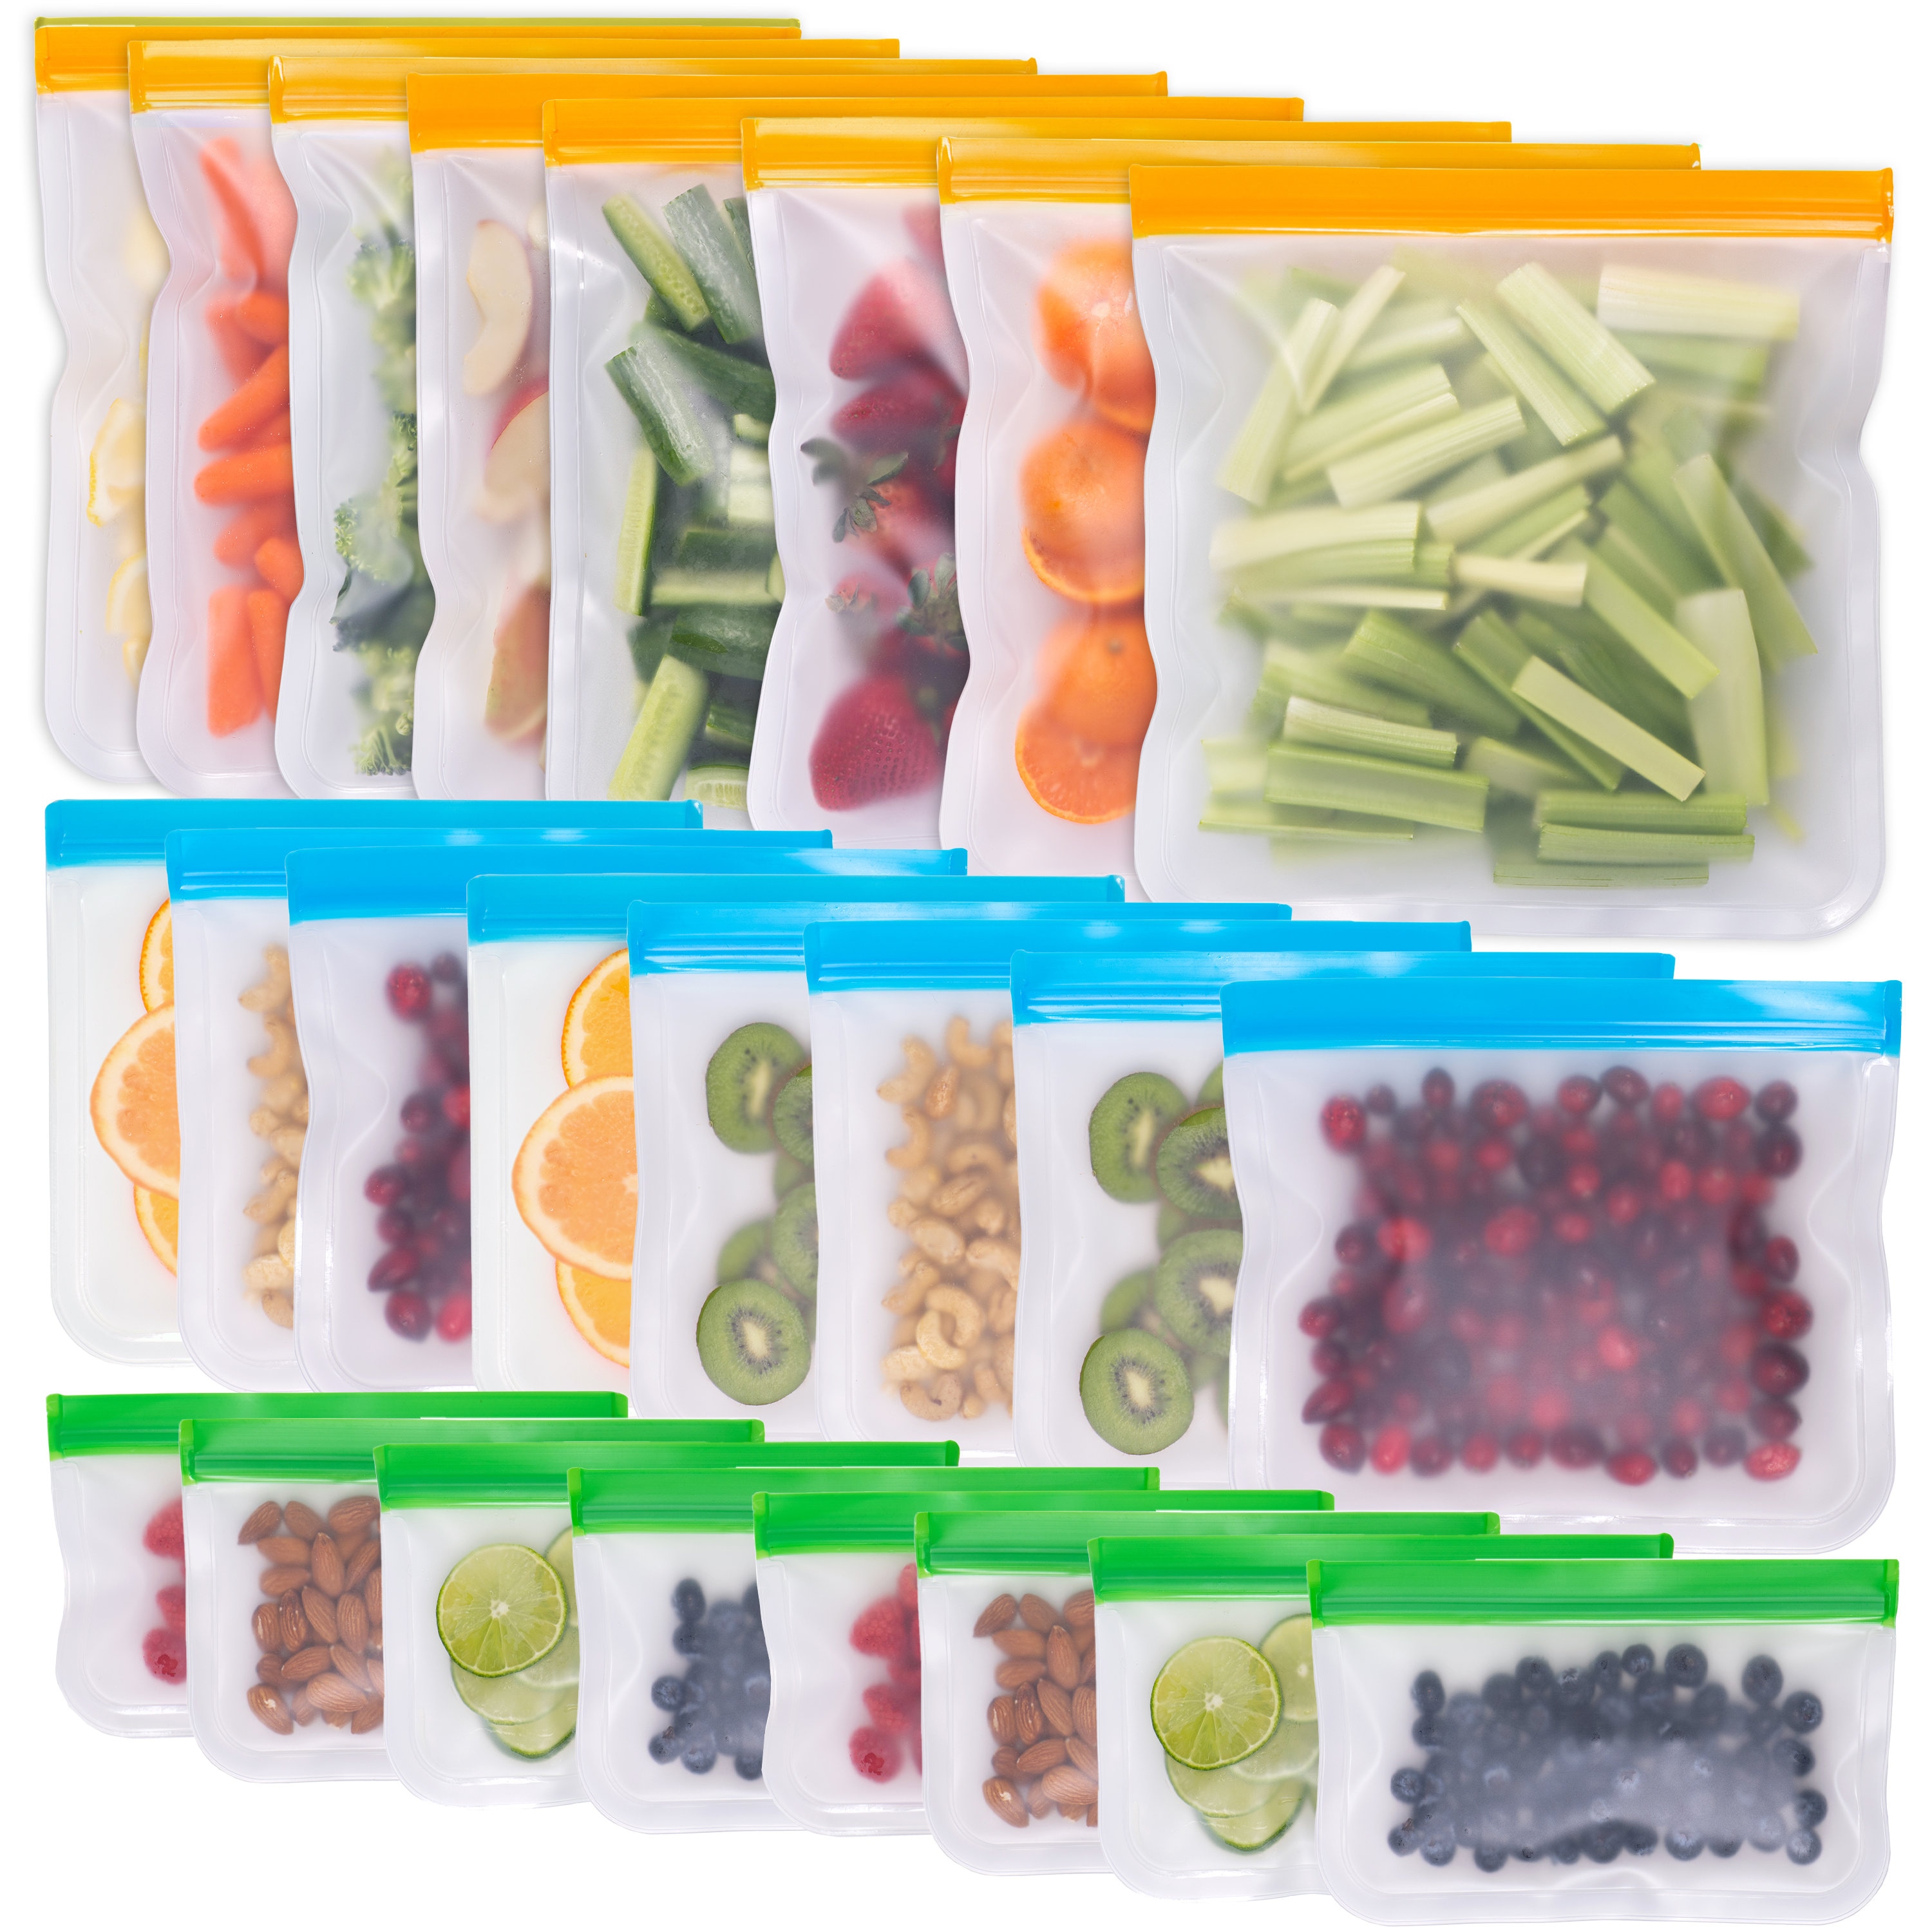 Reusable Silicone Food Storage Bags, 6Pack Reusable Gallon Bags Seal & Leak  Proof, BPA Free Reusable Freezer Bags for Kids Travel, Marinate Meats,  Fruit or food Storage 